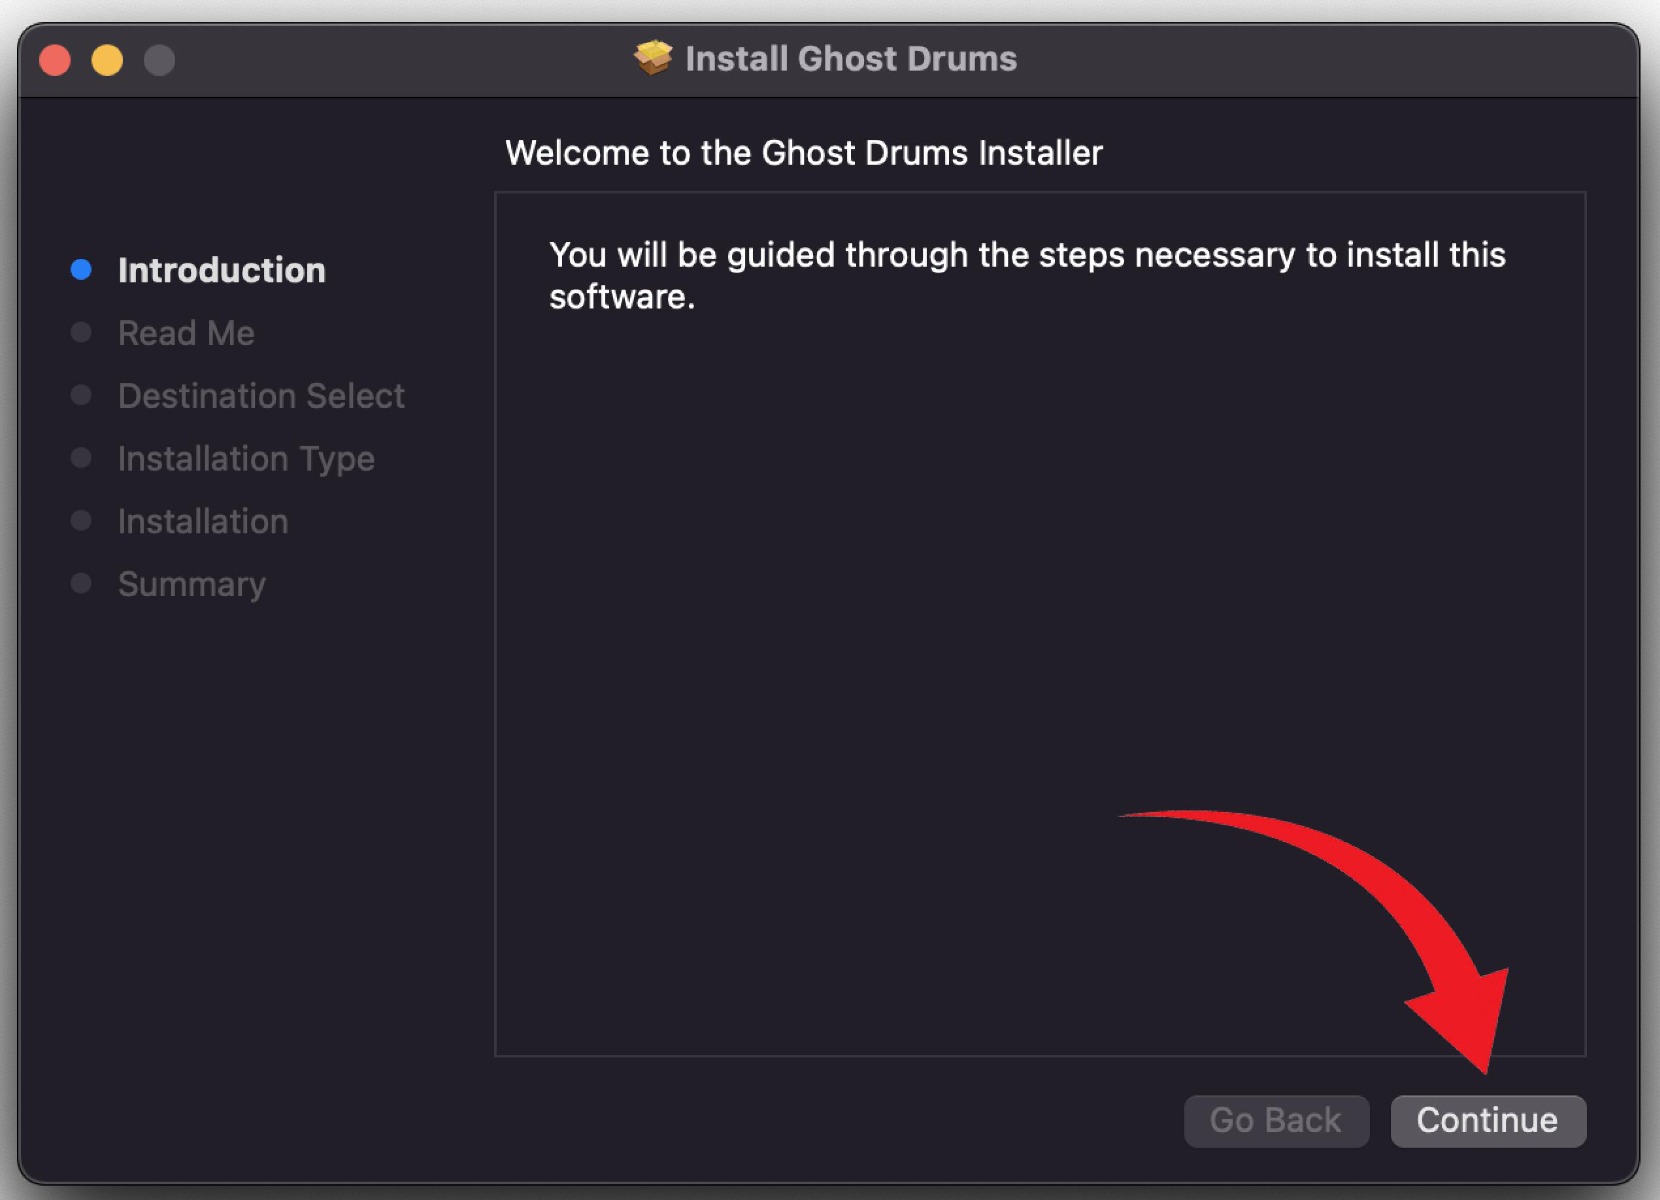 How to Install Drum Plugin Ghost Drums on macOS Step 4